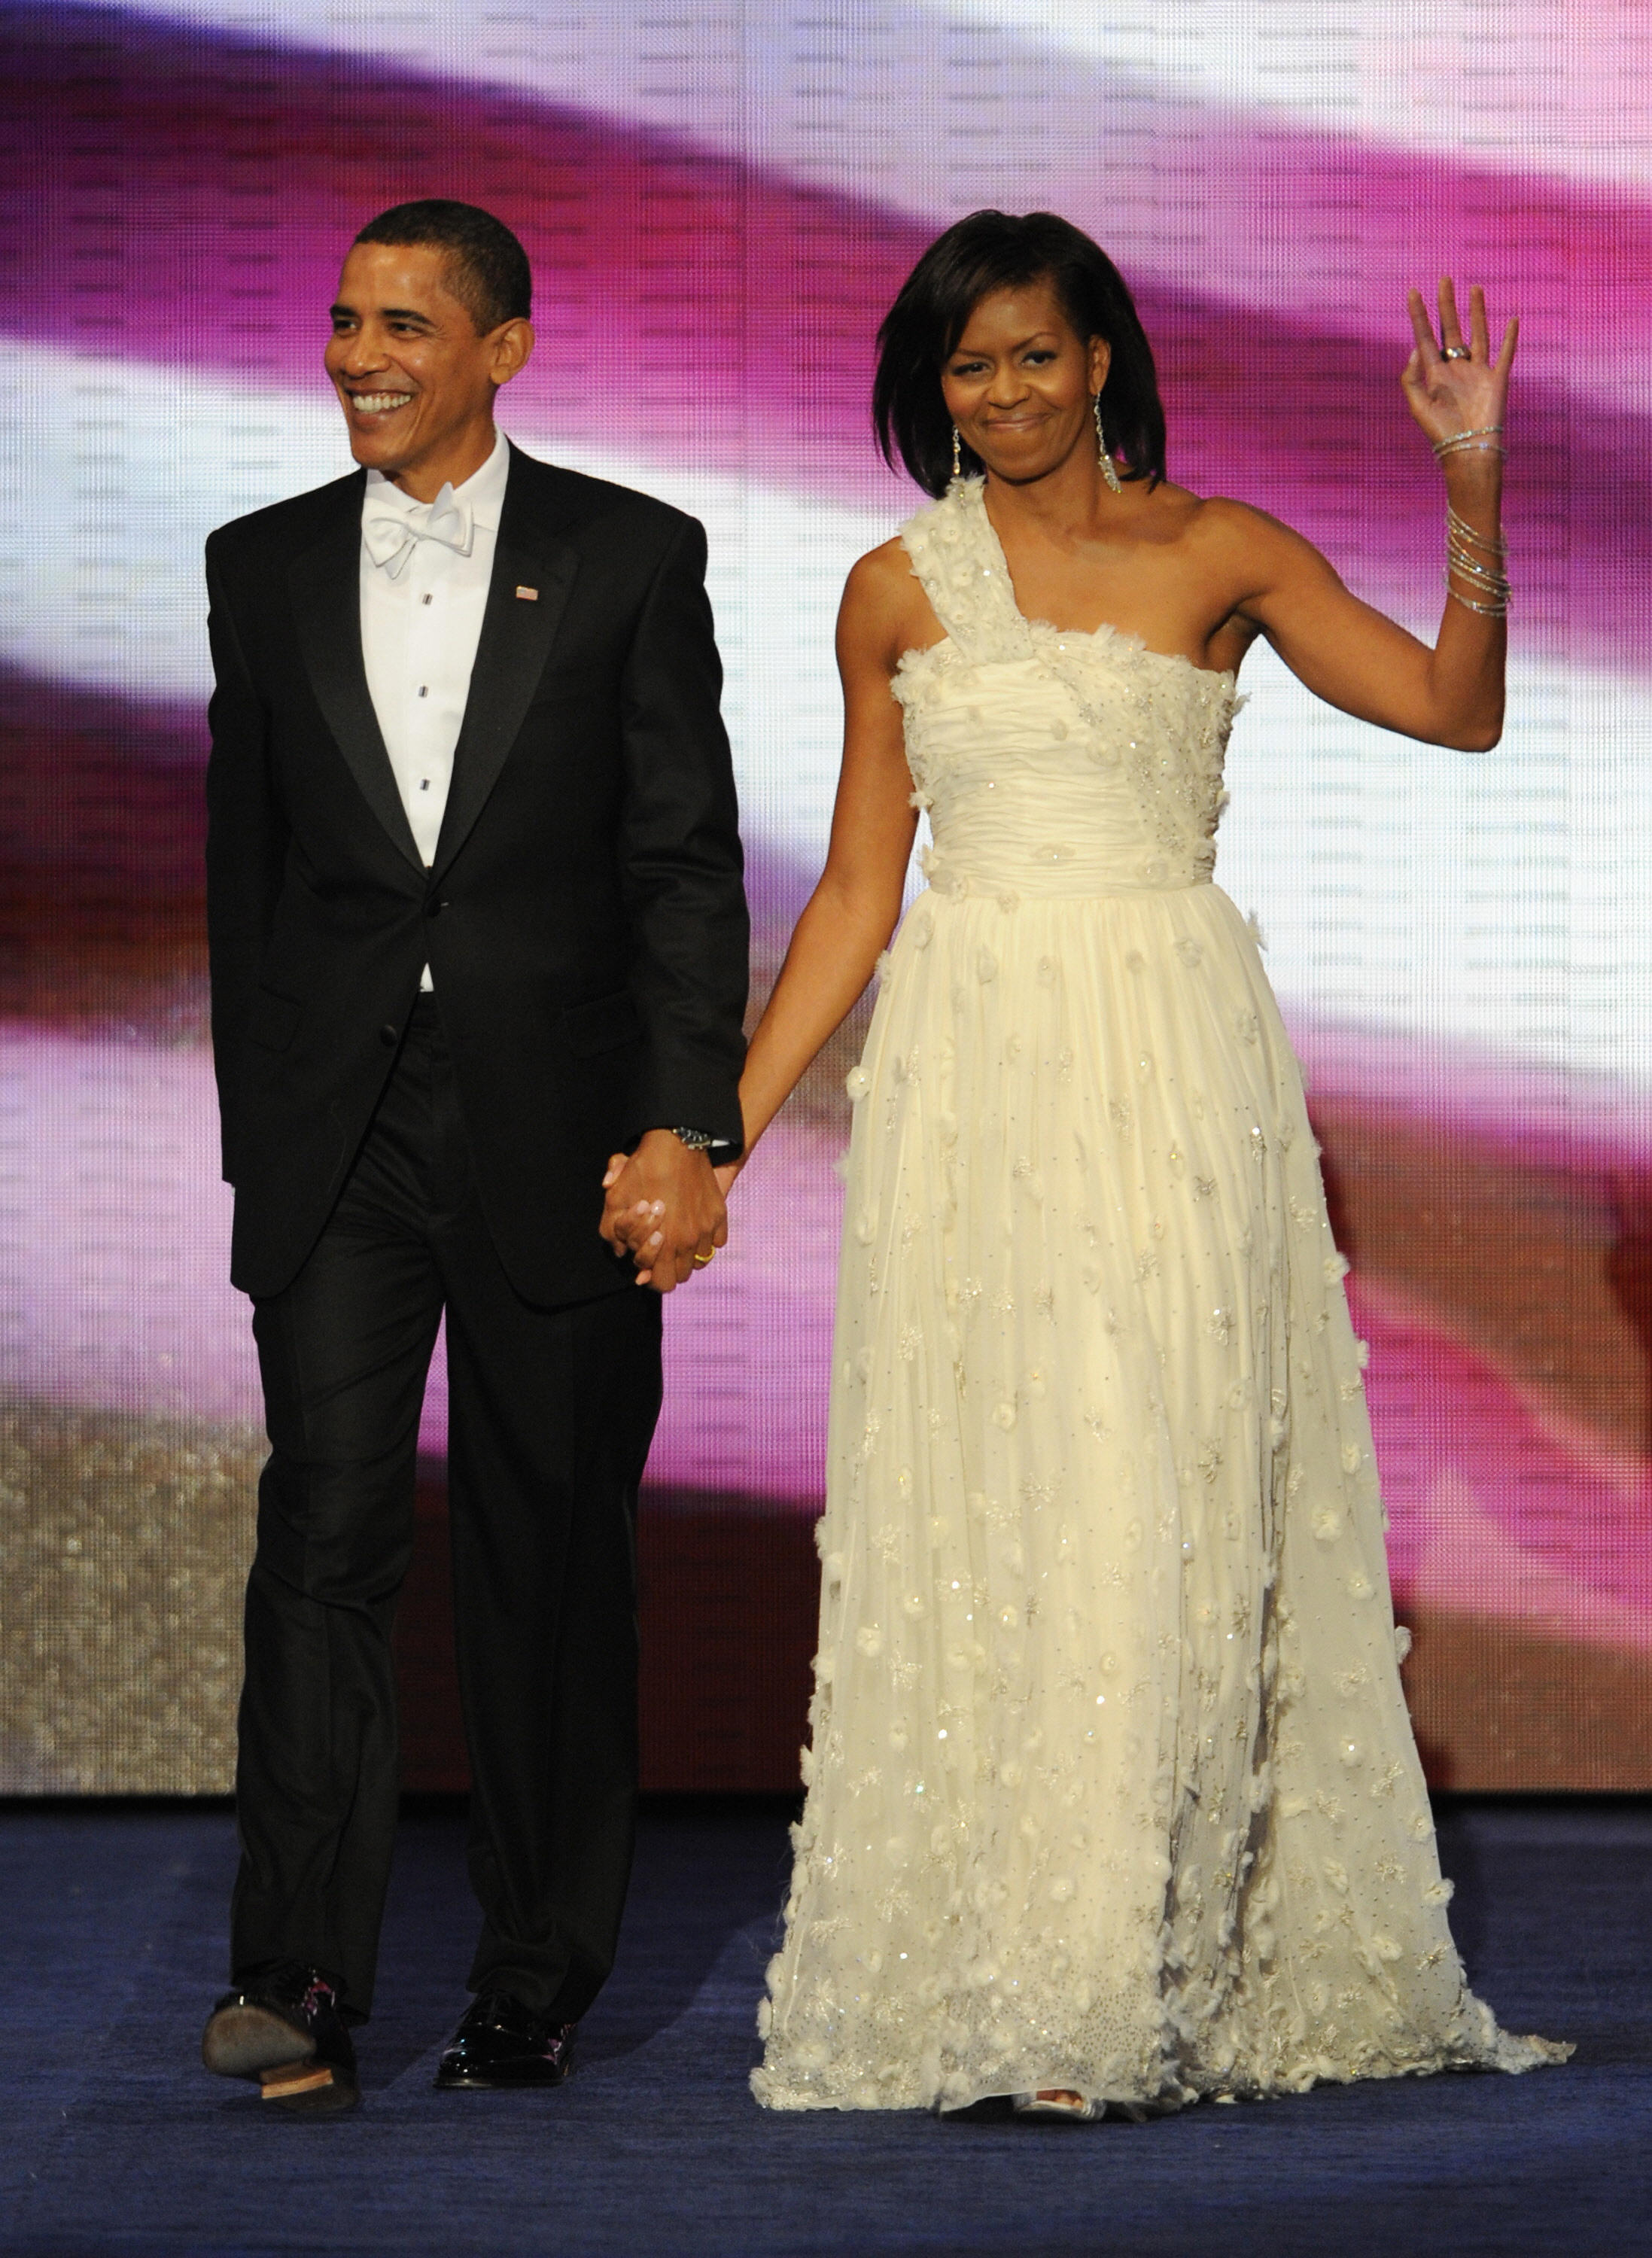 Michelle Obama 2009 Inauguration Gown